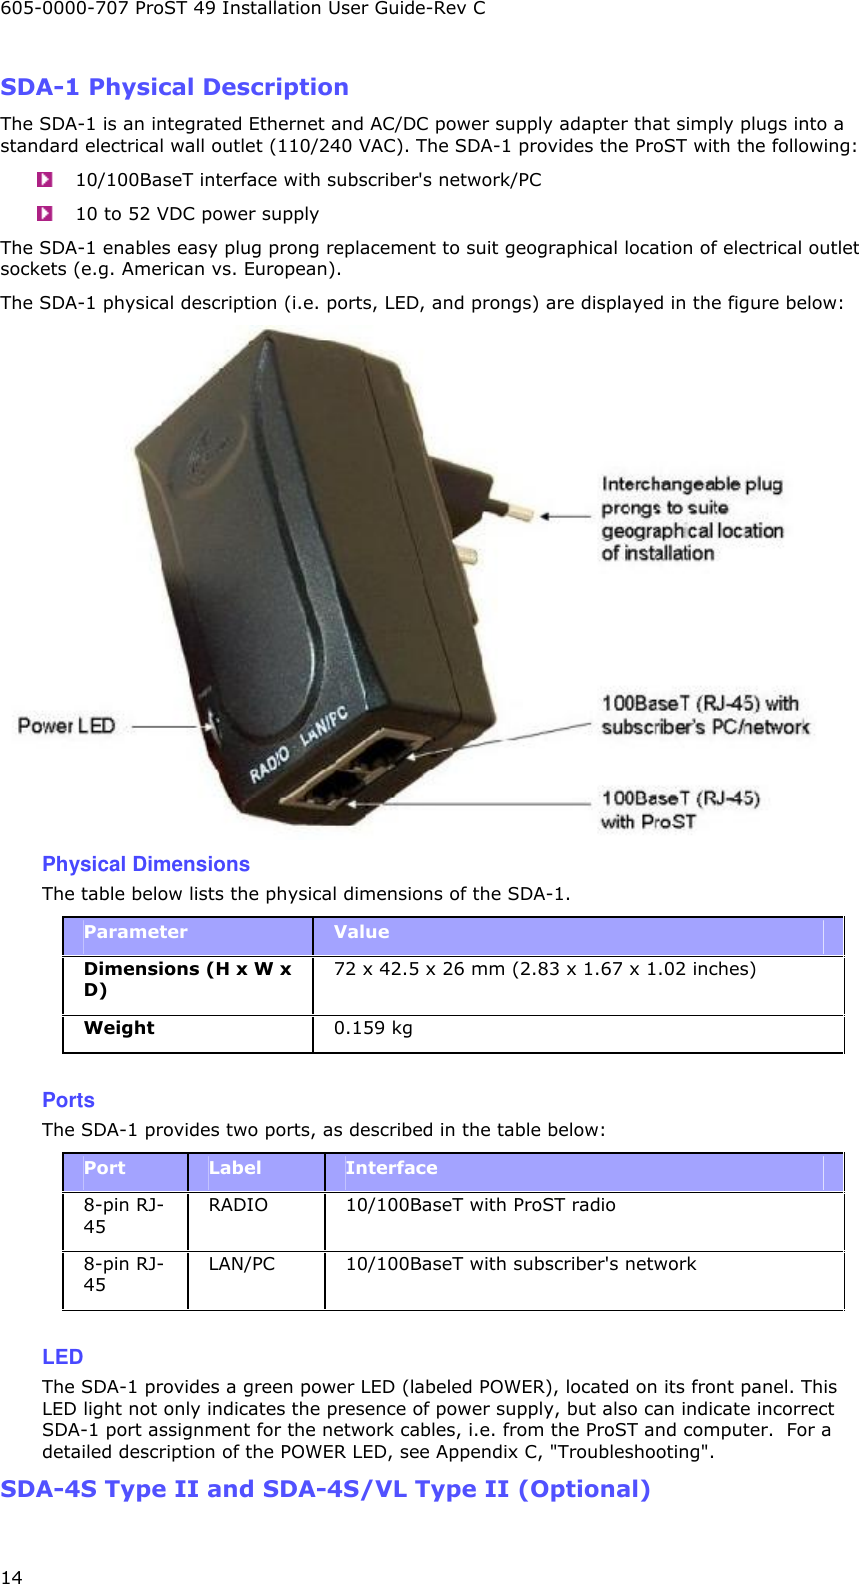 605-0000-707 ProST 49 Installation User Guide-Rev C 14 SDA-1 Physical Description The SDA-1 is an integrated Ethernet and AC/DC power supply adapter that simply plugs into a standard electrical wall outlet (110/240 VAC). The SDA-1 provides the ProST with the following:  10/100BaseT interface with subscriber&apos;s network/PC  10 to 52 VDC power supply The SDA-1 enables easy plug prong replacement to suit geographical location of electrical outlet sockets (e.g. American vs. European).   The SDA-1 physical description (i.e. ports, LED, and prongs) are displayed in the figure below:  Physical Dimensions The table below lists the physical dimensions of the SDA-1. Parameter  Value Dimensions (H x W x D) 72 x 42.5 x 26 mm (2.83 x 1.67 x 1.02 inches) Weight  0.159 kg  Ports The SDA-1 provides two ports, as described in the table below:  Port  Label  Interface 8-pin RJ-45 RADIO   10/100BaseT with ProST radio 8-pin RJ-45 LAN/PC   10/100BaseT with subscriber&apos;s network  LED The SDA-1 provides a green power LED (labeled POWER), located on its front panel. This LED light not only indicates the presence of power supply, but also can indicate incorrect SDA-1 port assignment for the network cables, i.e. from the ProST and computer.  For a detailed description of the POWER LED, see Appendix C, &quot;Troubleshooting&quot;. SDA-4S Type II and SDA-4S/VL Type II (Optional) 